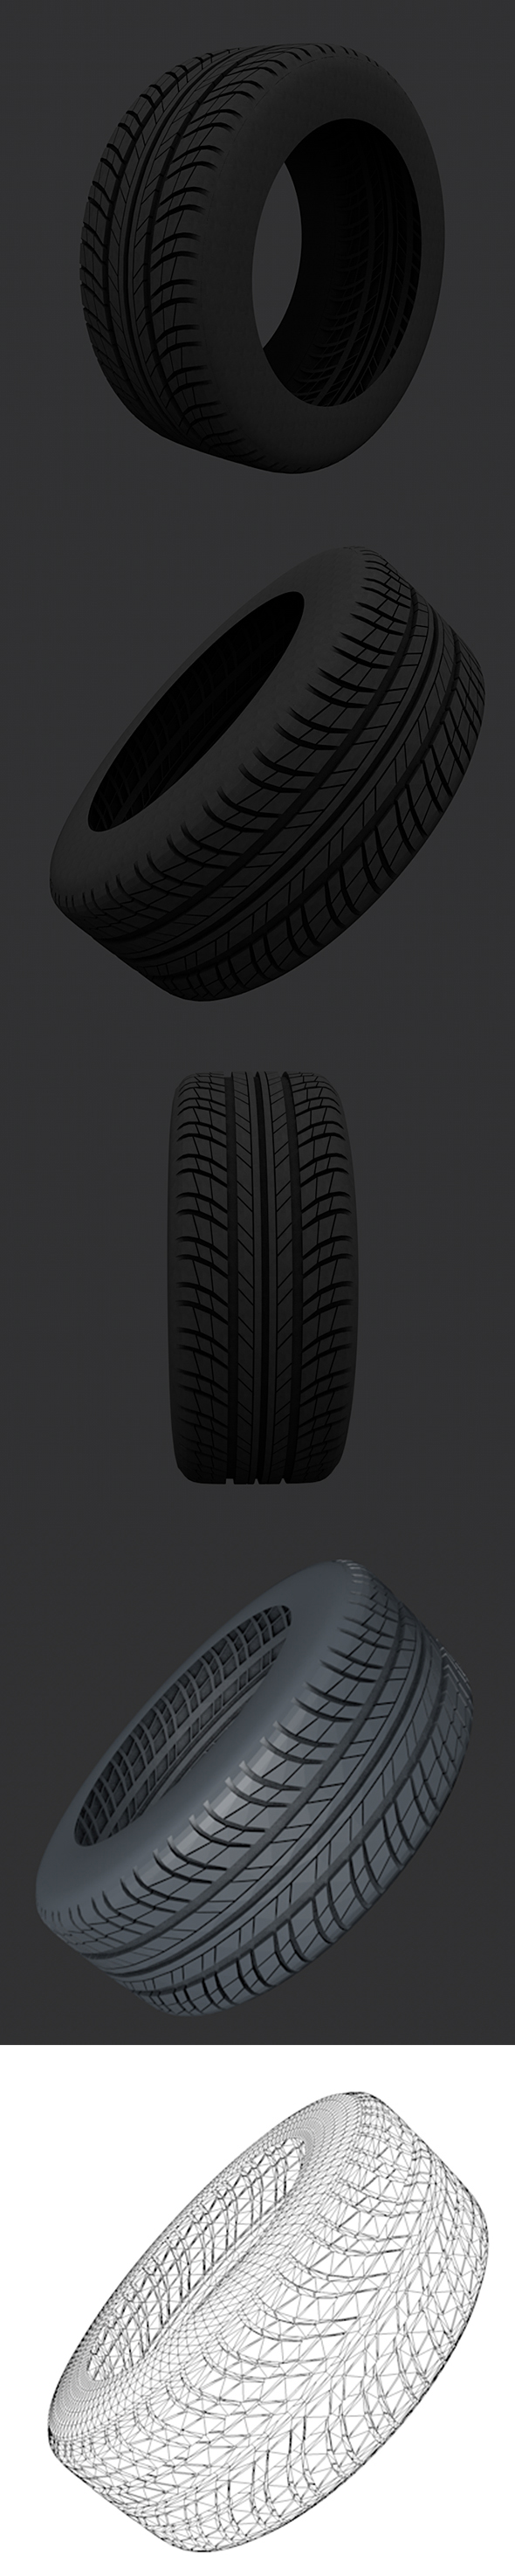 Tire 3D Models with full textures